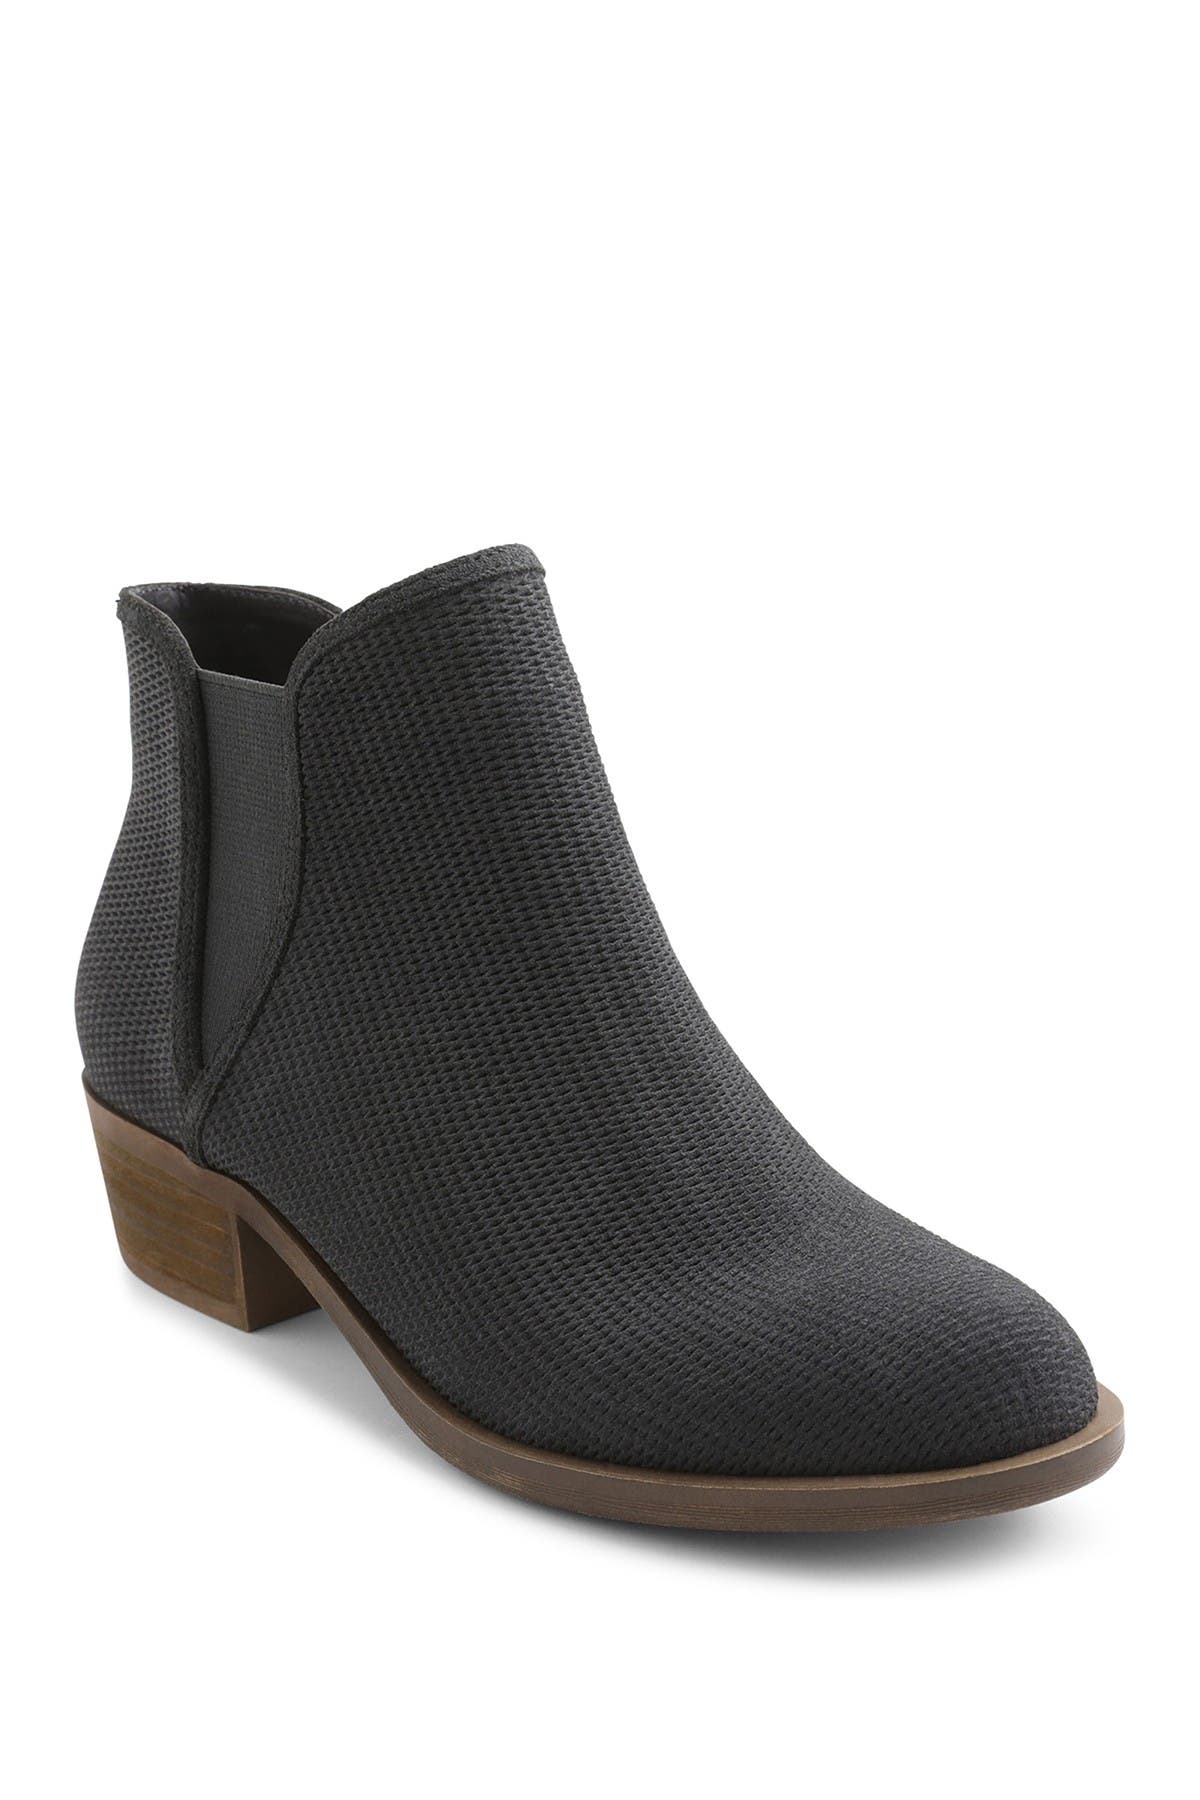 kensie women's ankle boots